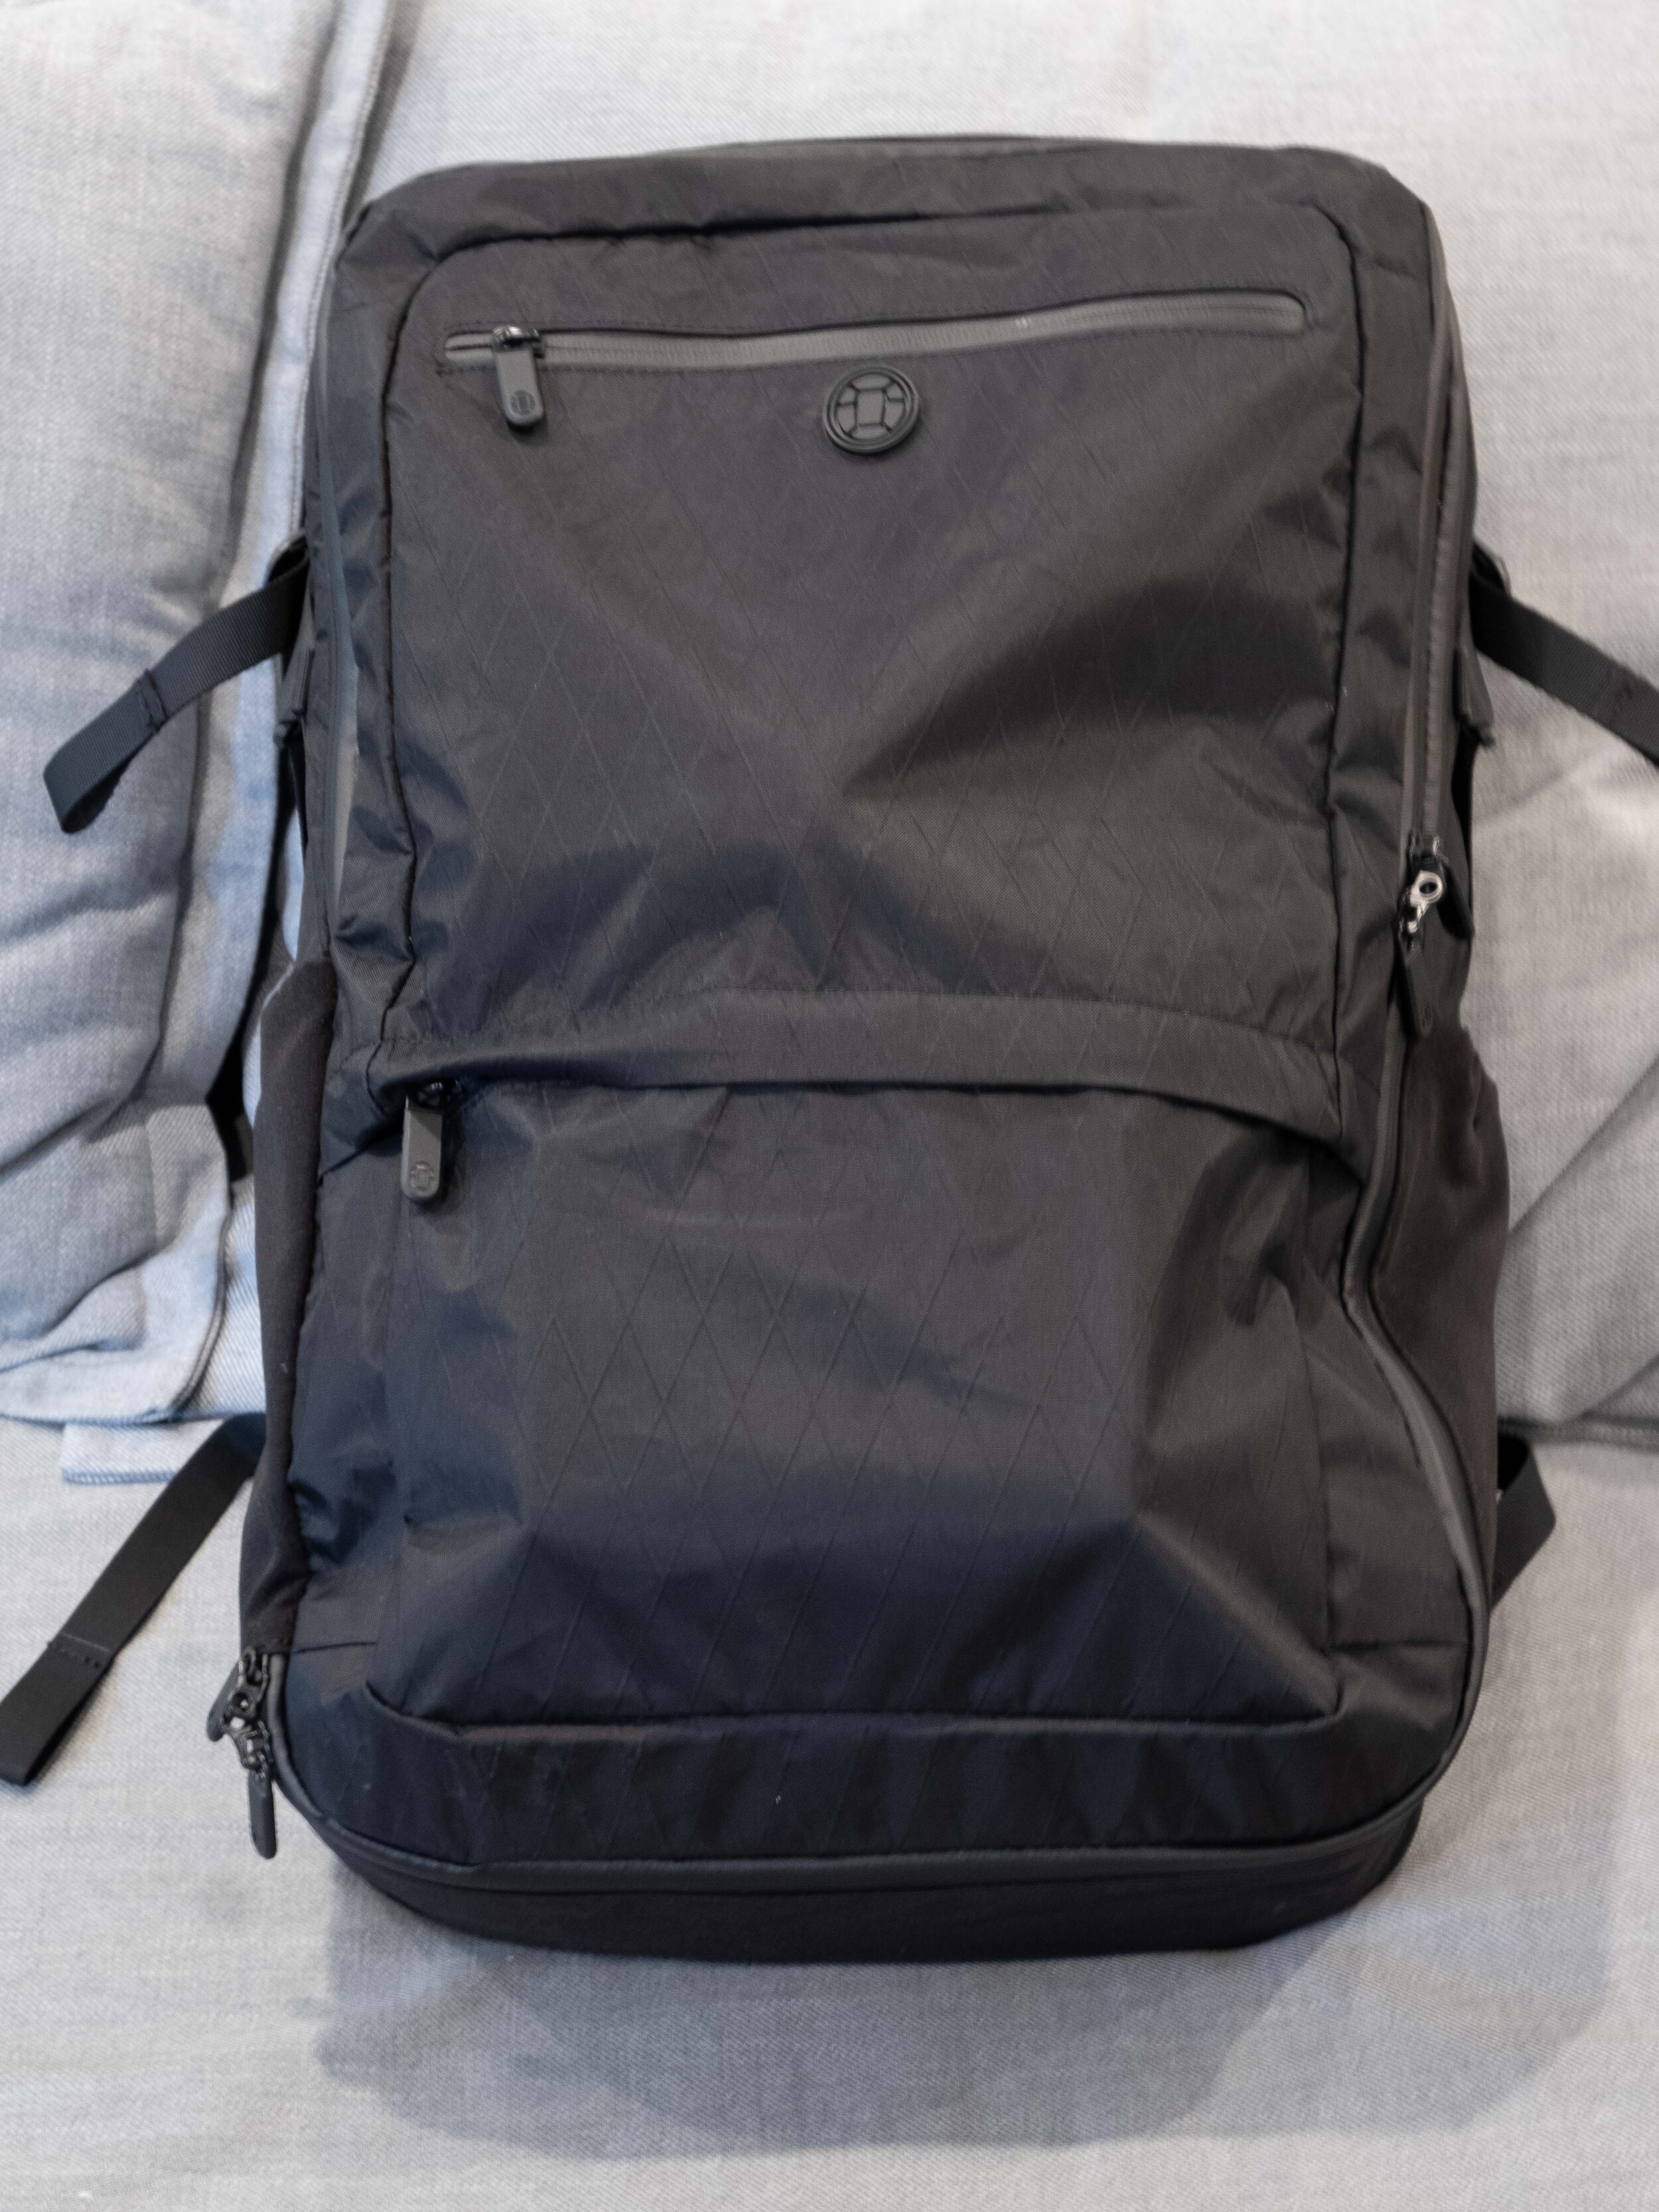 Tortuga Setout Backpack Review: In-Depth and Hands-On